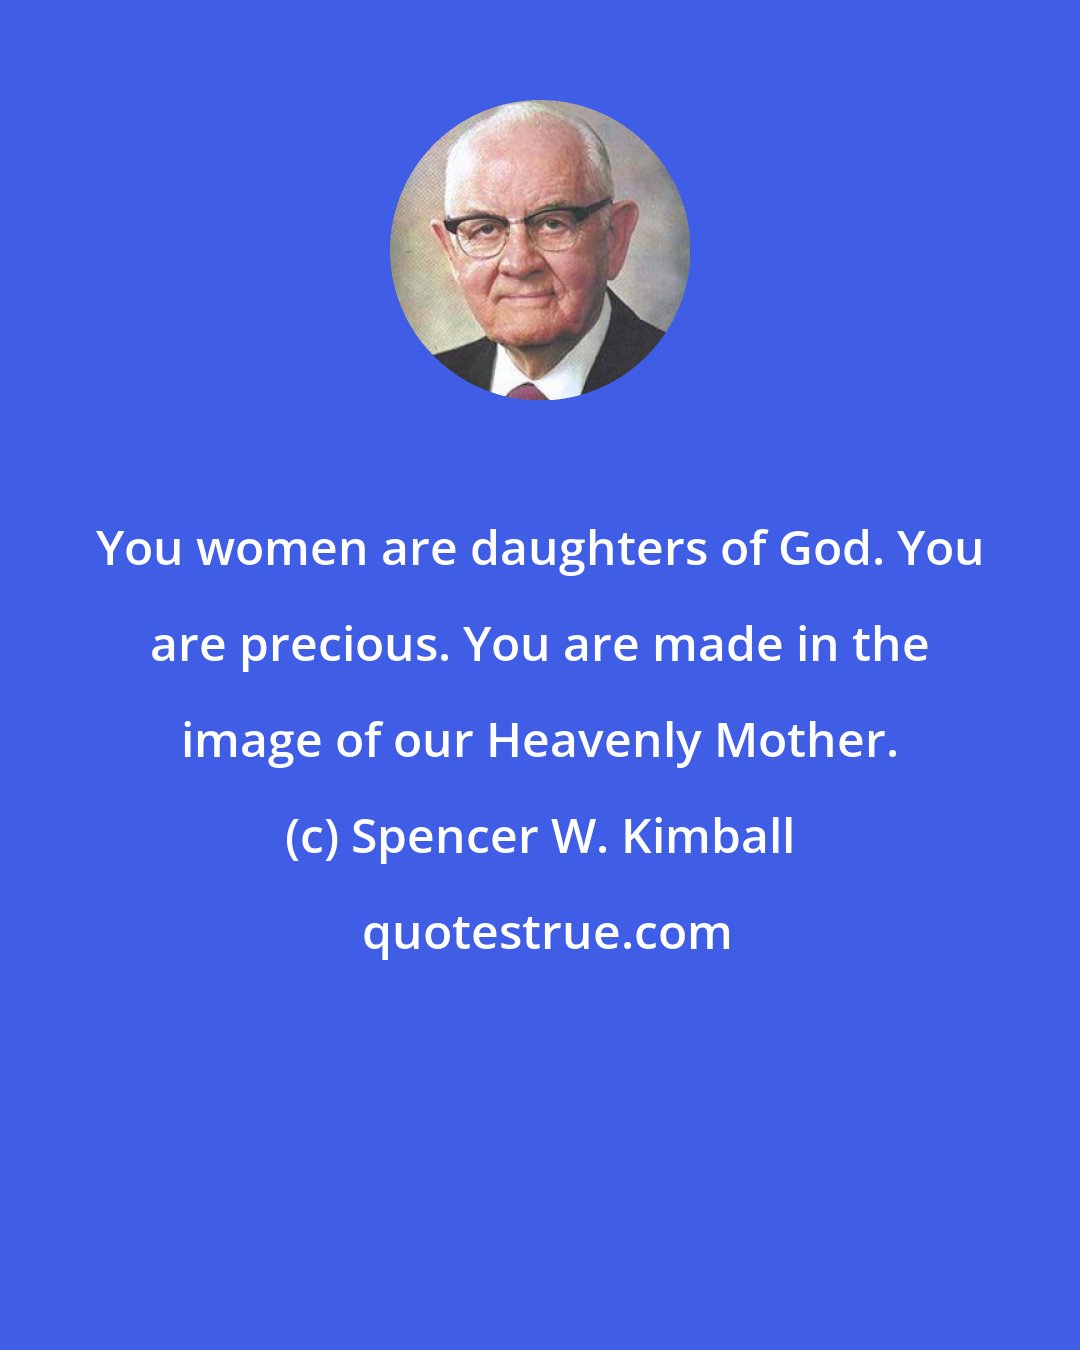 Spencer W. Kimball: You women are daughters of God. You are precious. You are made in the image of our Heavenly Mother.